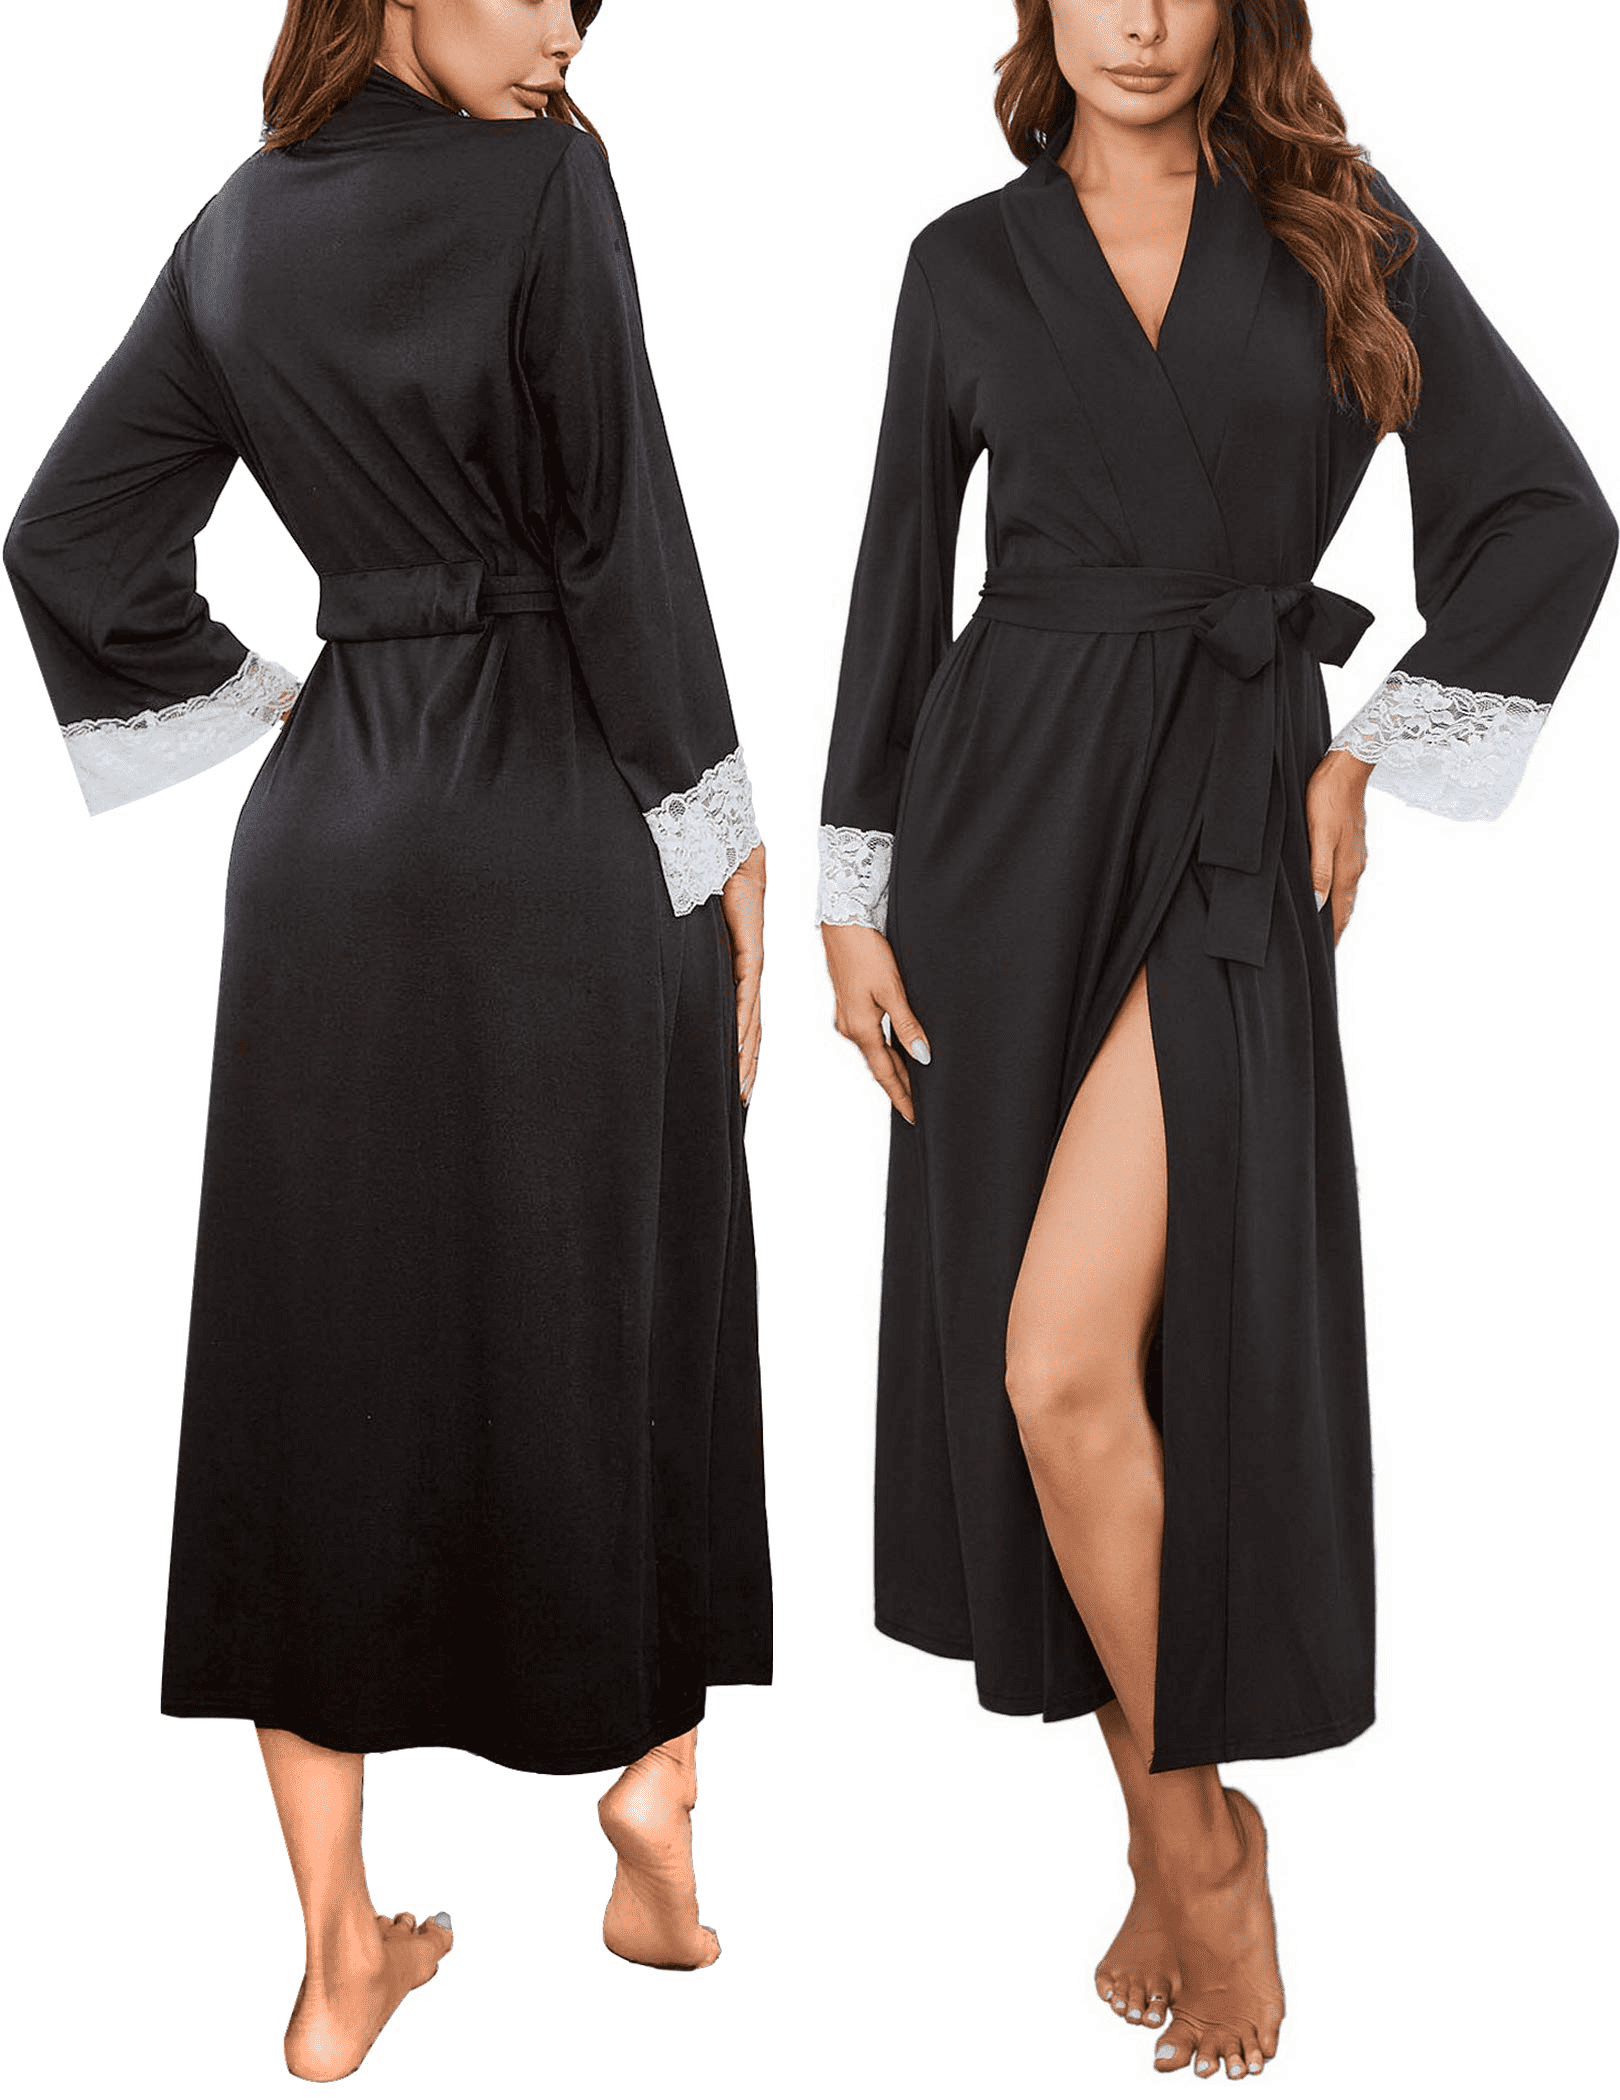 Womens Clothing Nightwear and sleepwear Robes The Great Cotton The Sweatshirt Robe in Heather Grey robe dresses and bathrobes Grey 